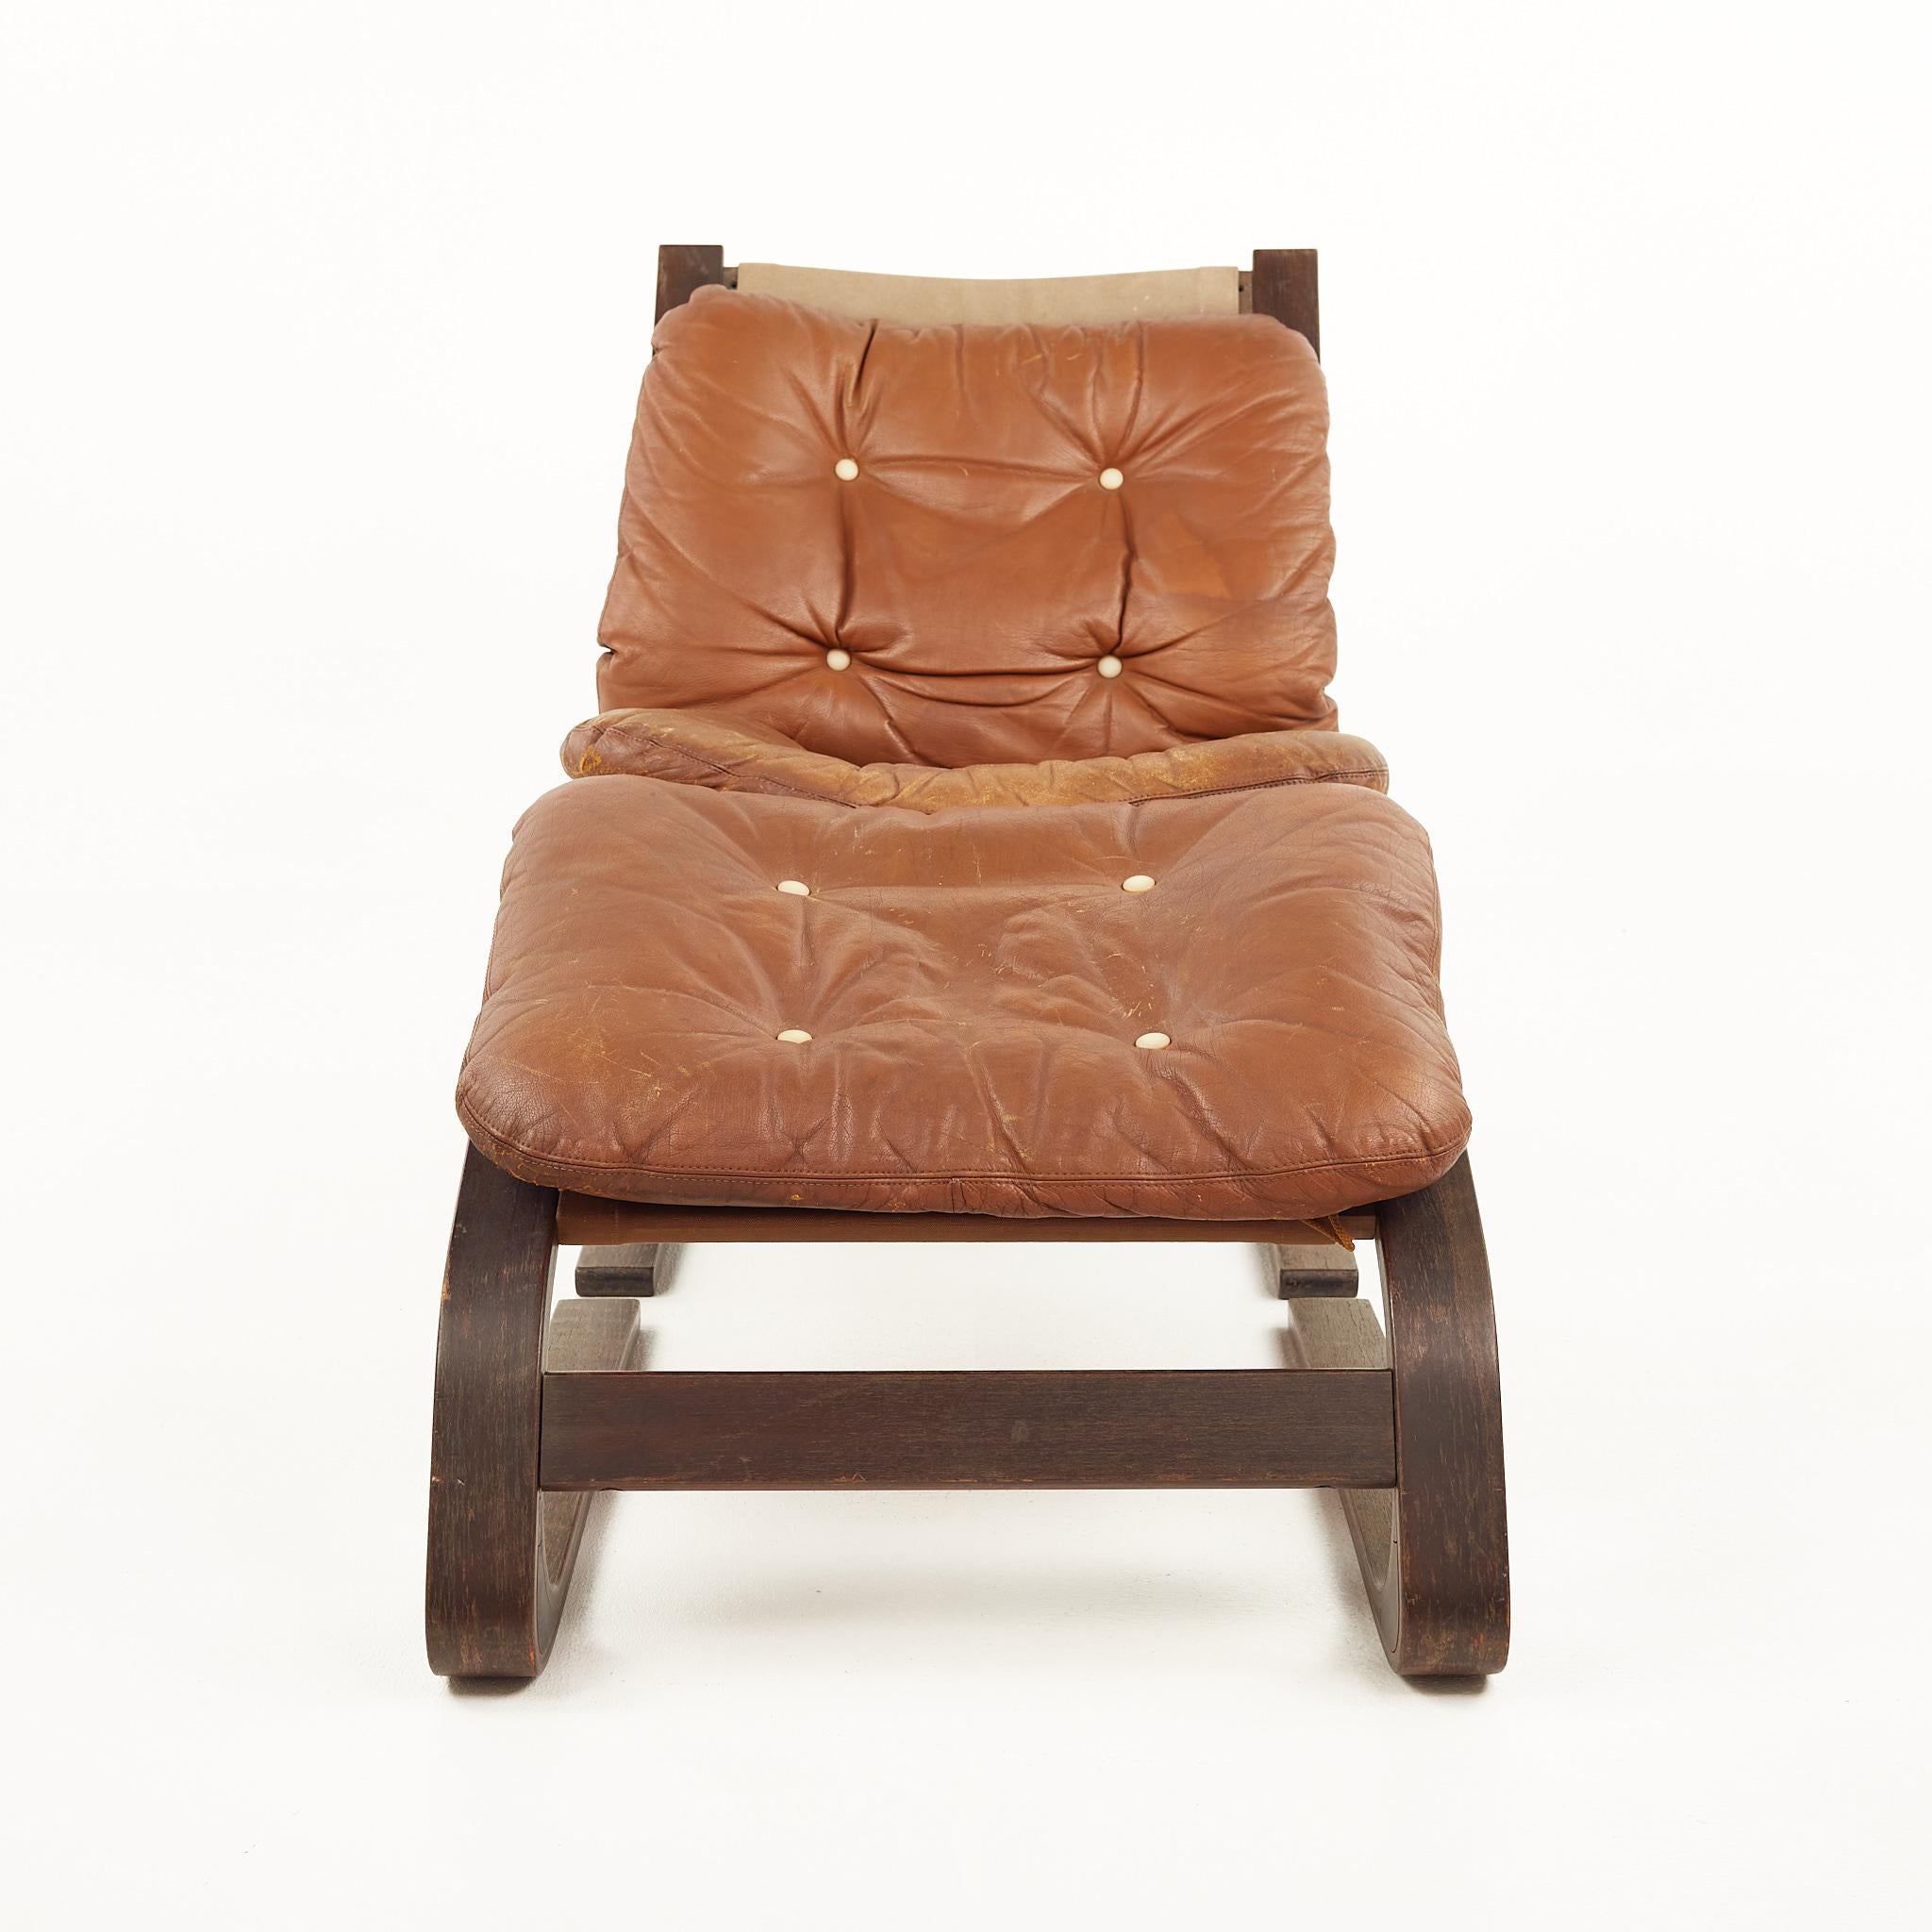 Westnofa Mid Century Bentwood Brown Leather Siesta chair with ottoman

The chair measures: 24 wide x 30 deep x 30 high, with a seat height of 18 inches

All pieces of furniture can be had in what we call restored vintage condition. That means